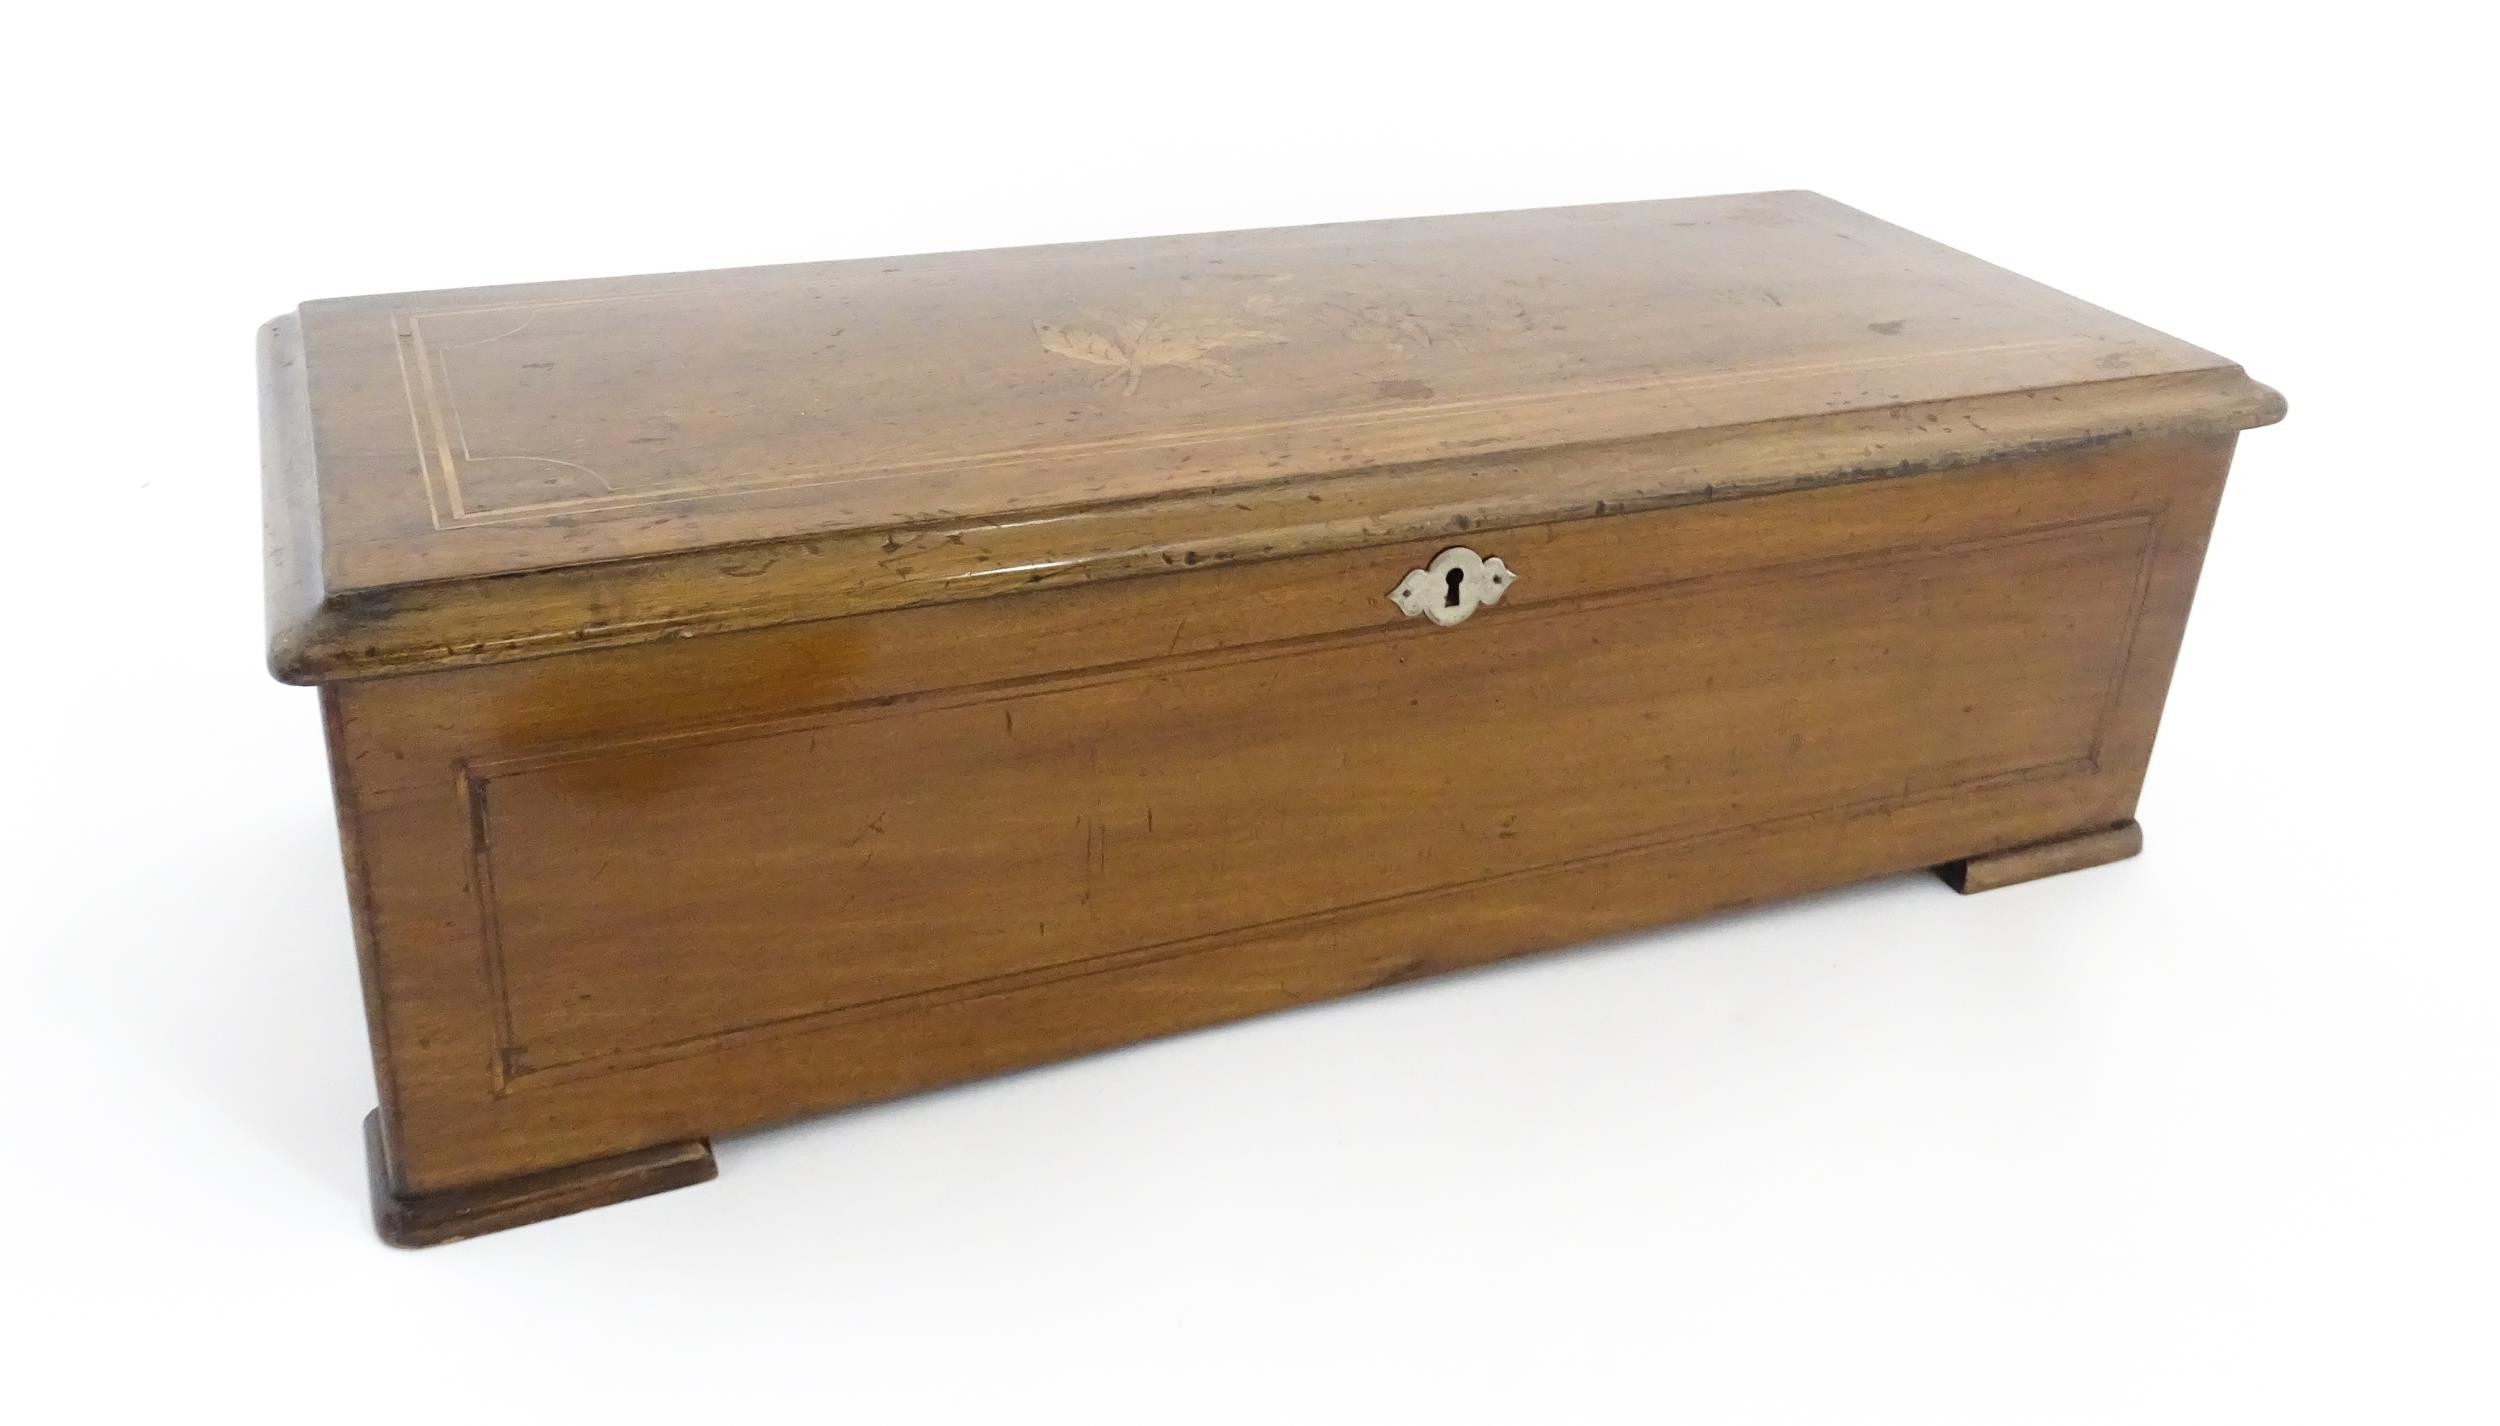 A 19thC Swiss rosewood music box with marquetry inlaid decoration to lid, playing 10 airs, by PVF of - Image 4 of 13